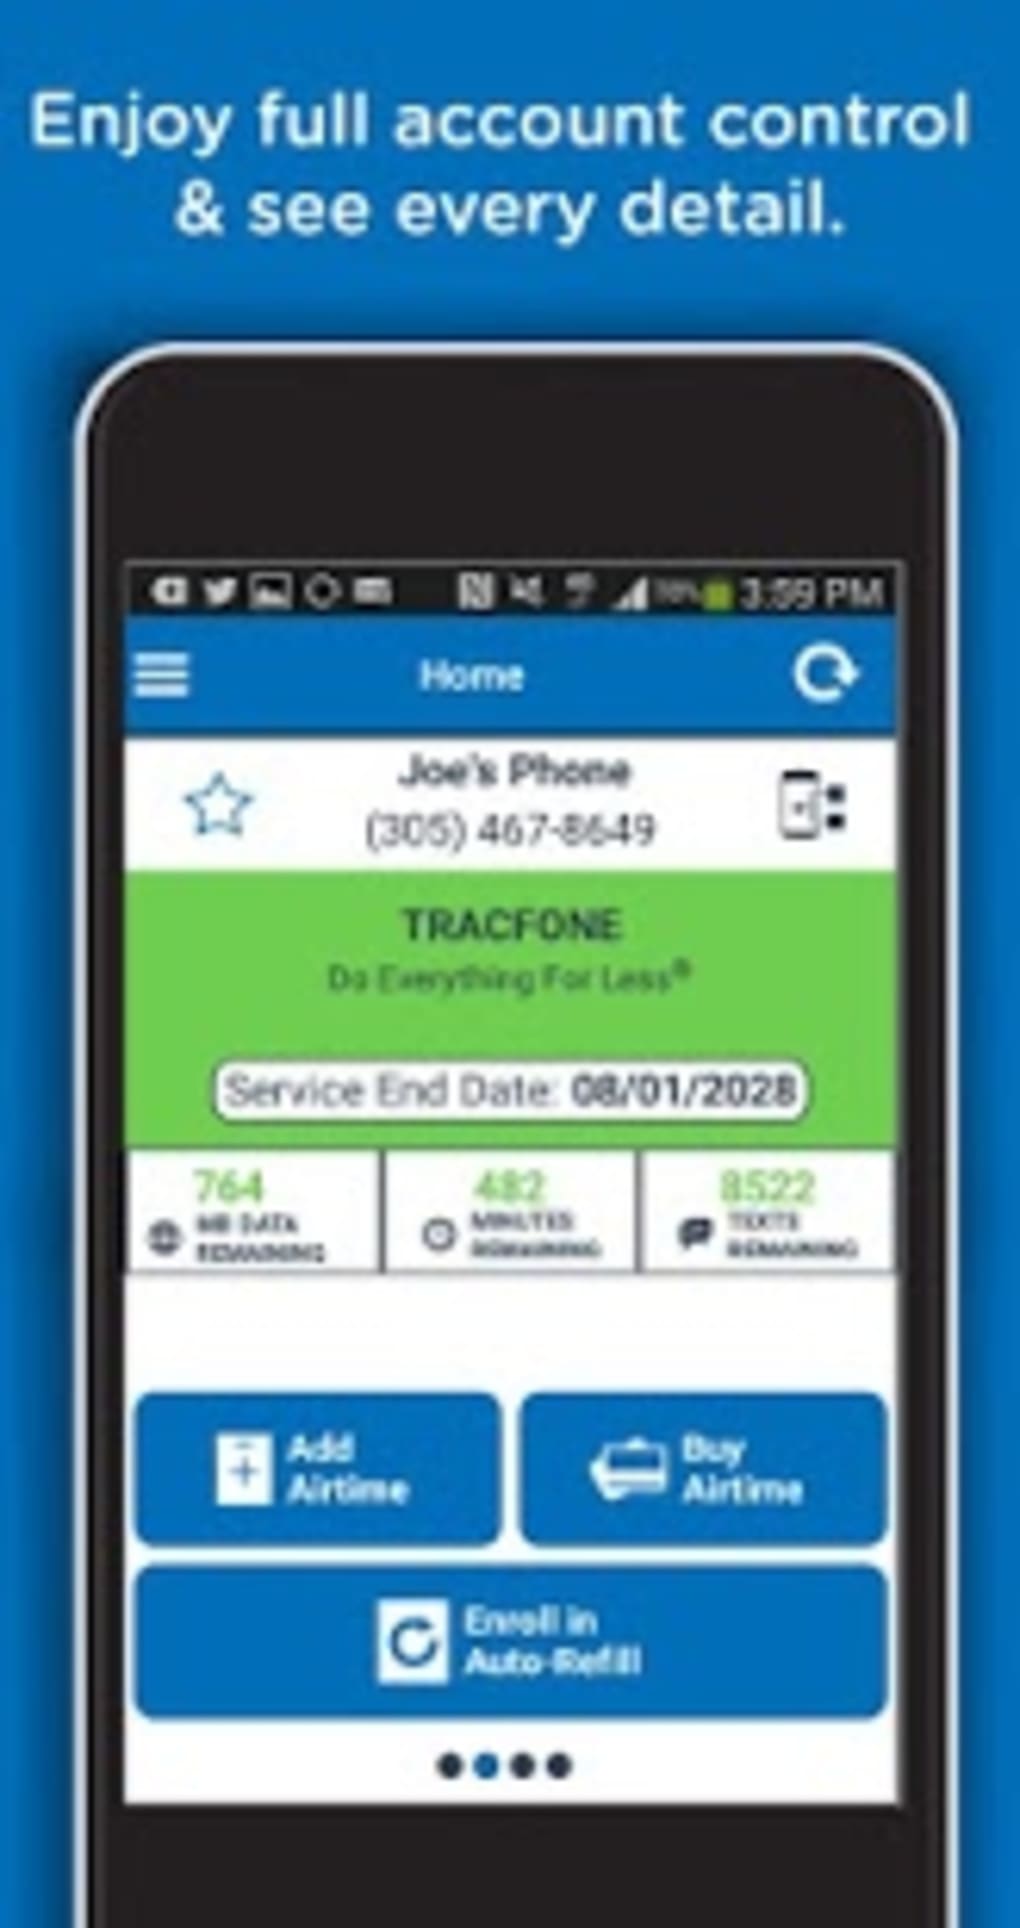 Downloading Free Ringtones With Tracfone